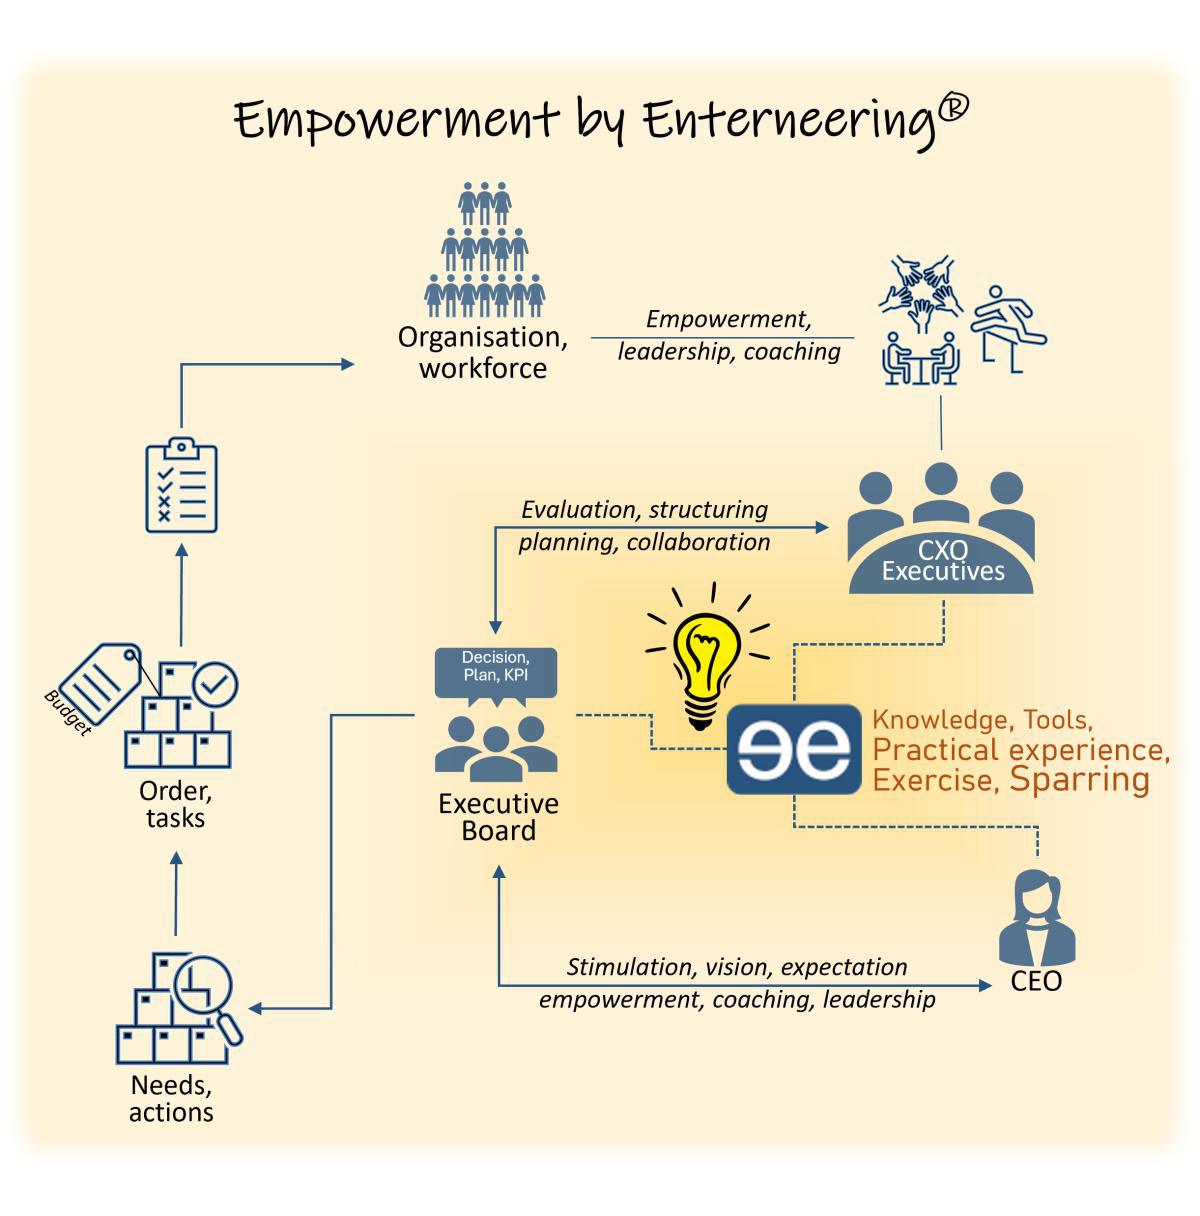 About Enterneering®, The APP and Us